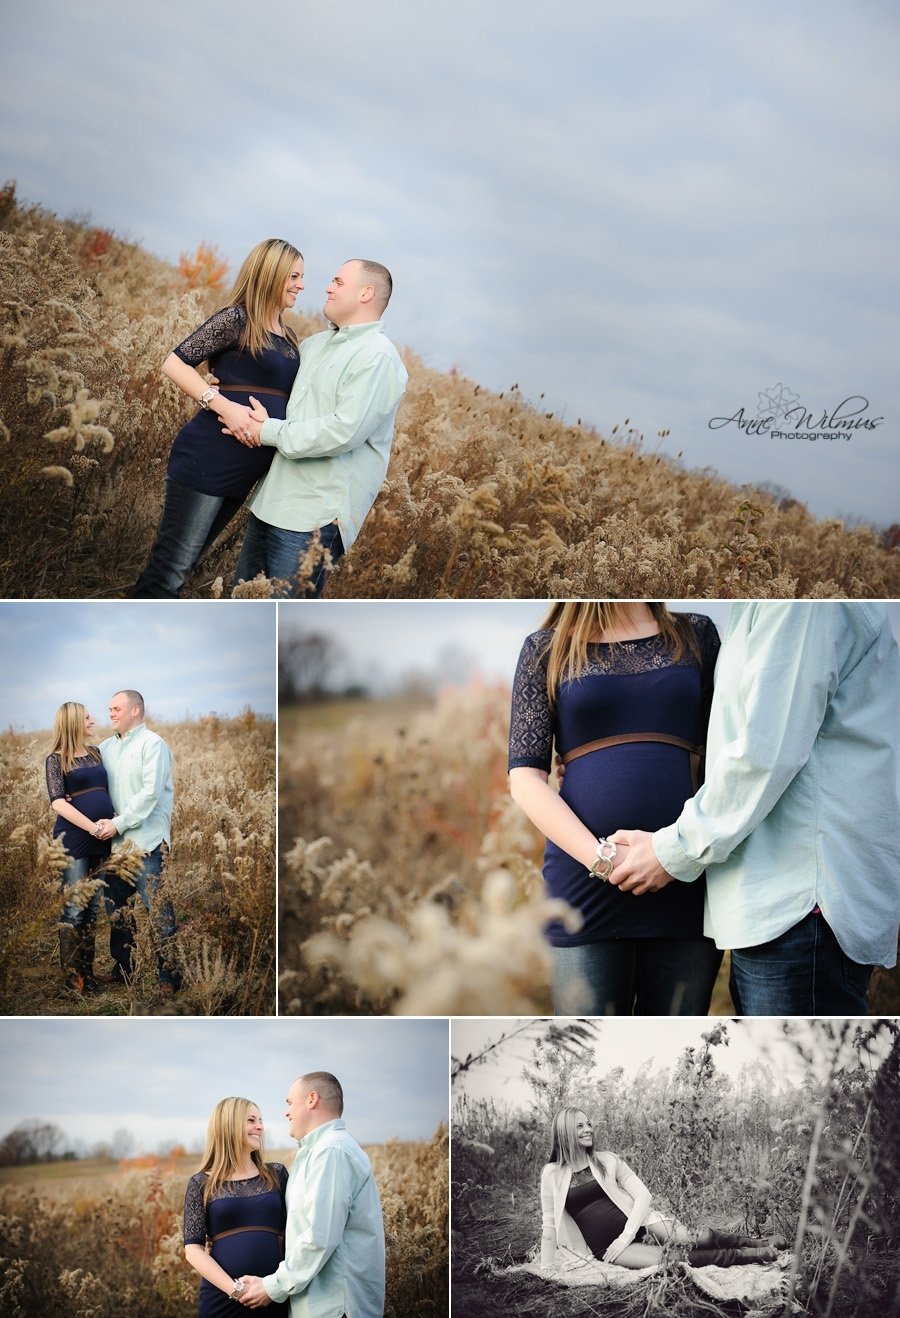 10 Famous Baby Bump Photo Shoot Ideas 4 best pittsburgh maternity and newborn photographer photo ideas in 2022